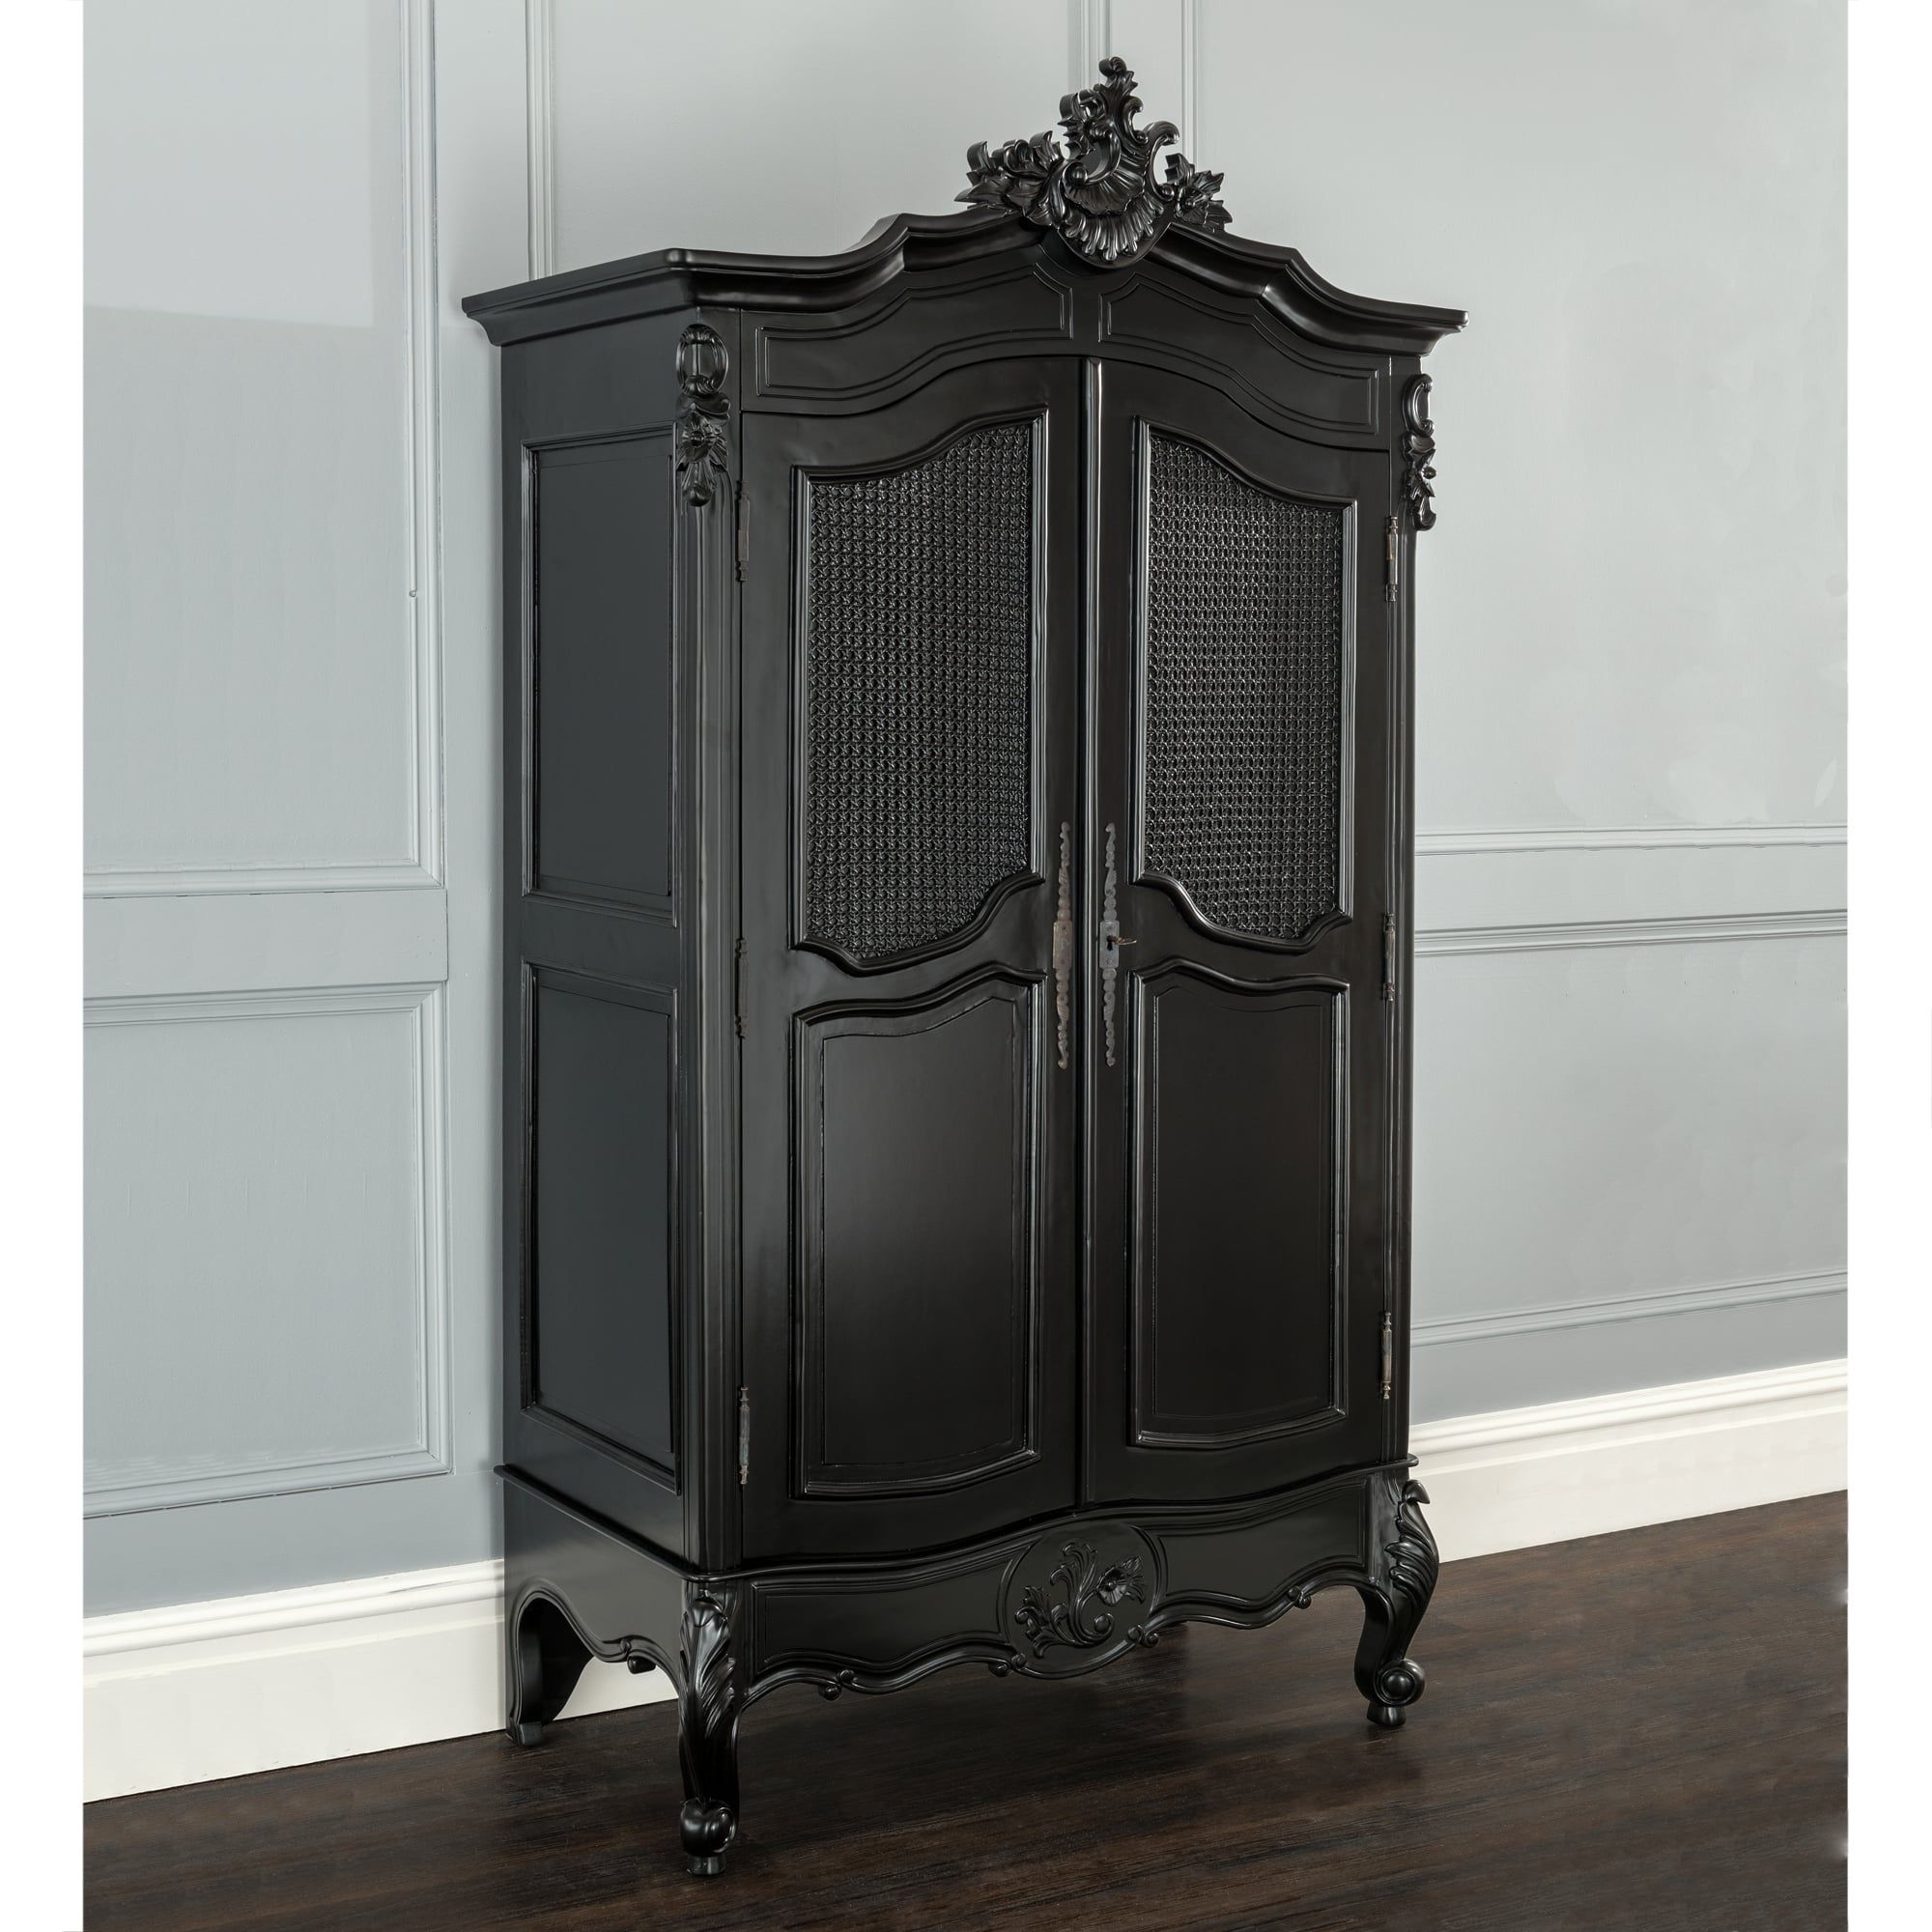 La Rochelle Antique French Wardrobe | Black Painted Furniture Inside Black French Wardrobes (View 2 of 15)